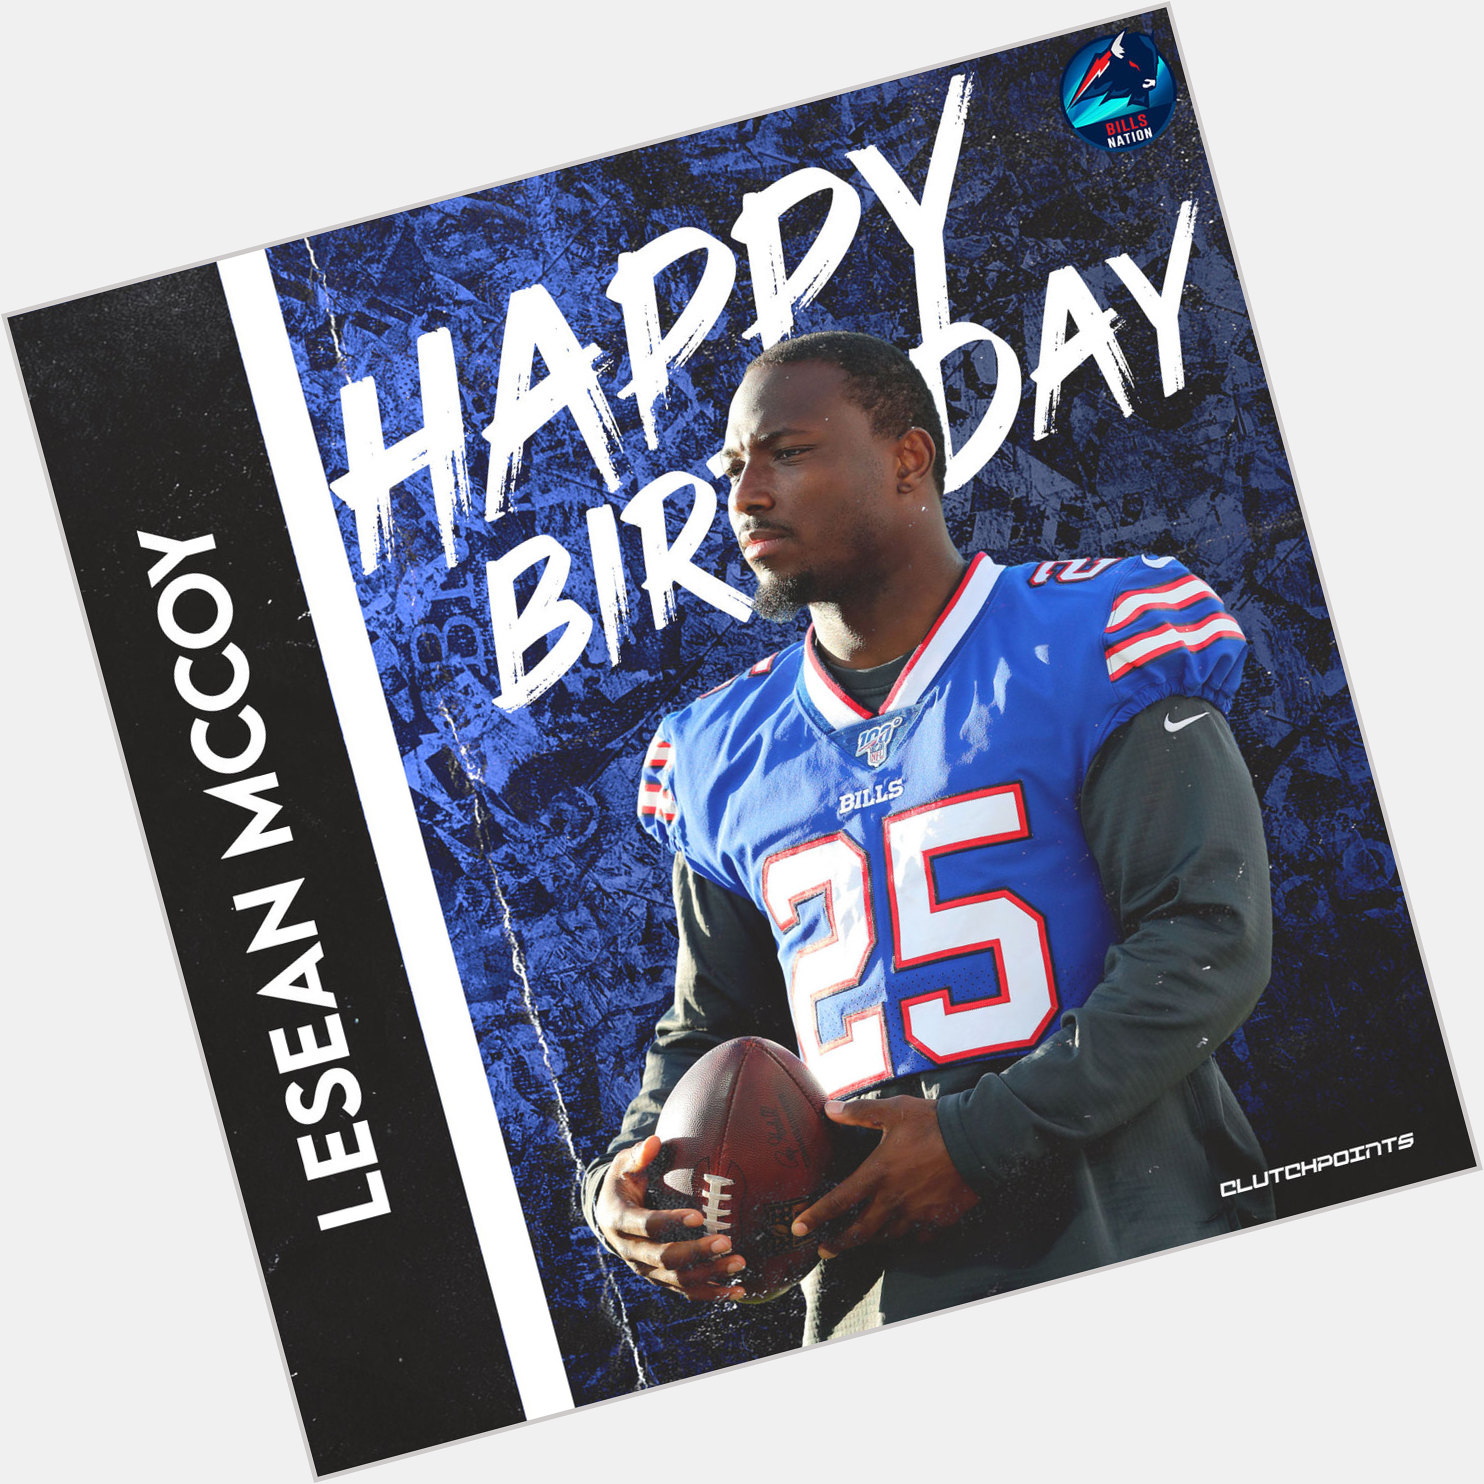 Bills Nation, join us in wishing LeSean McCoy a happy 34th birthday 